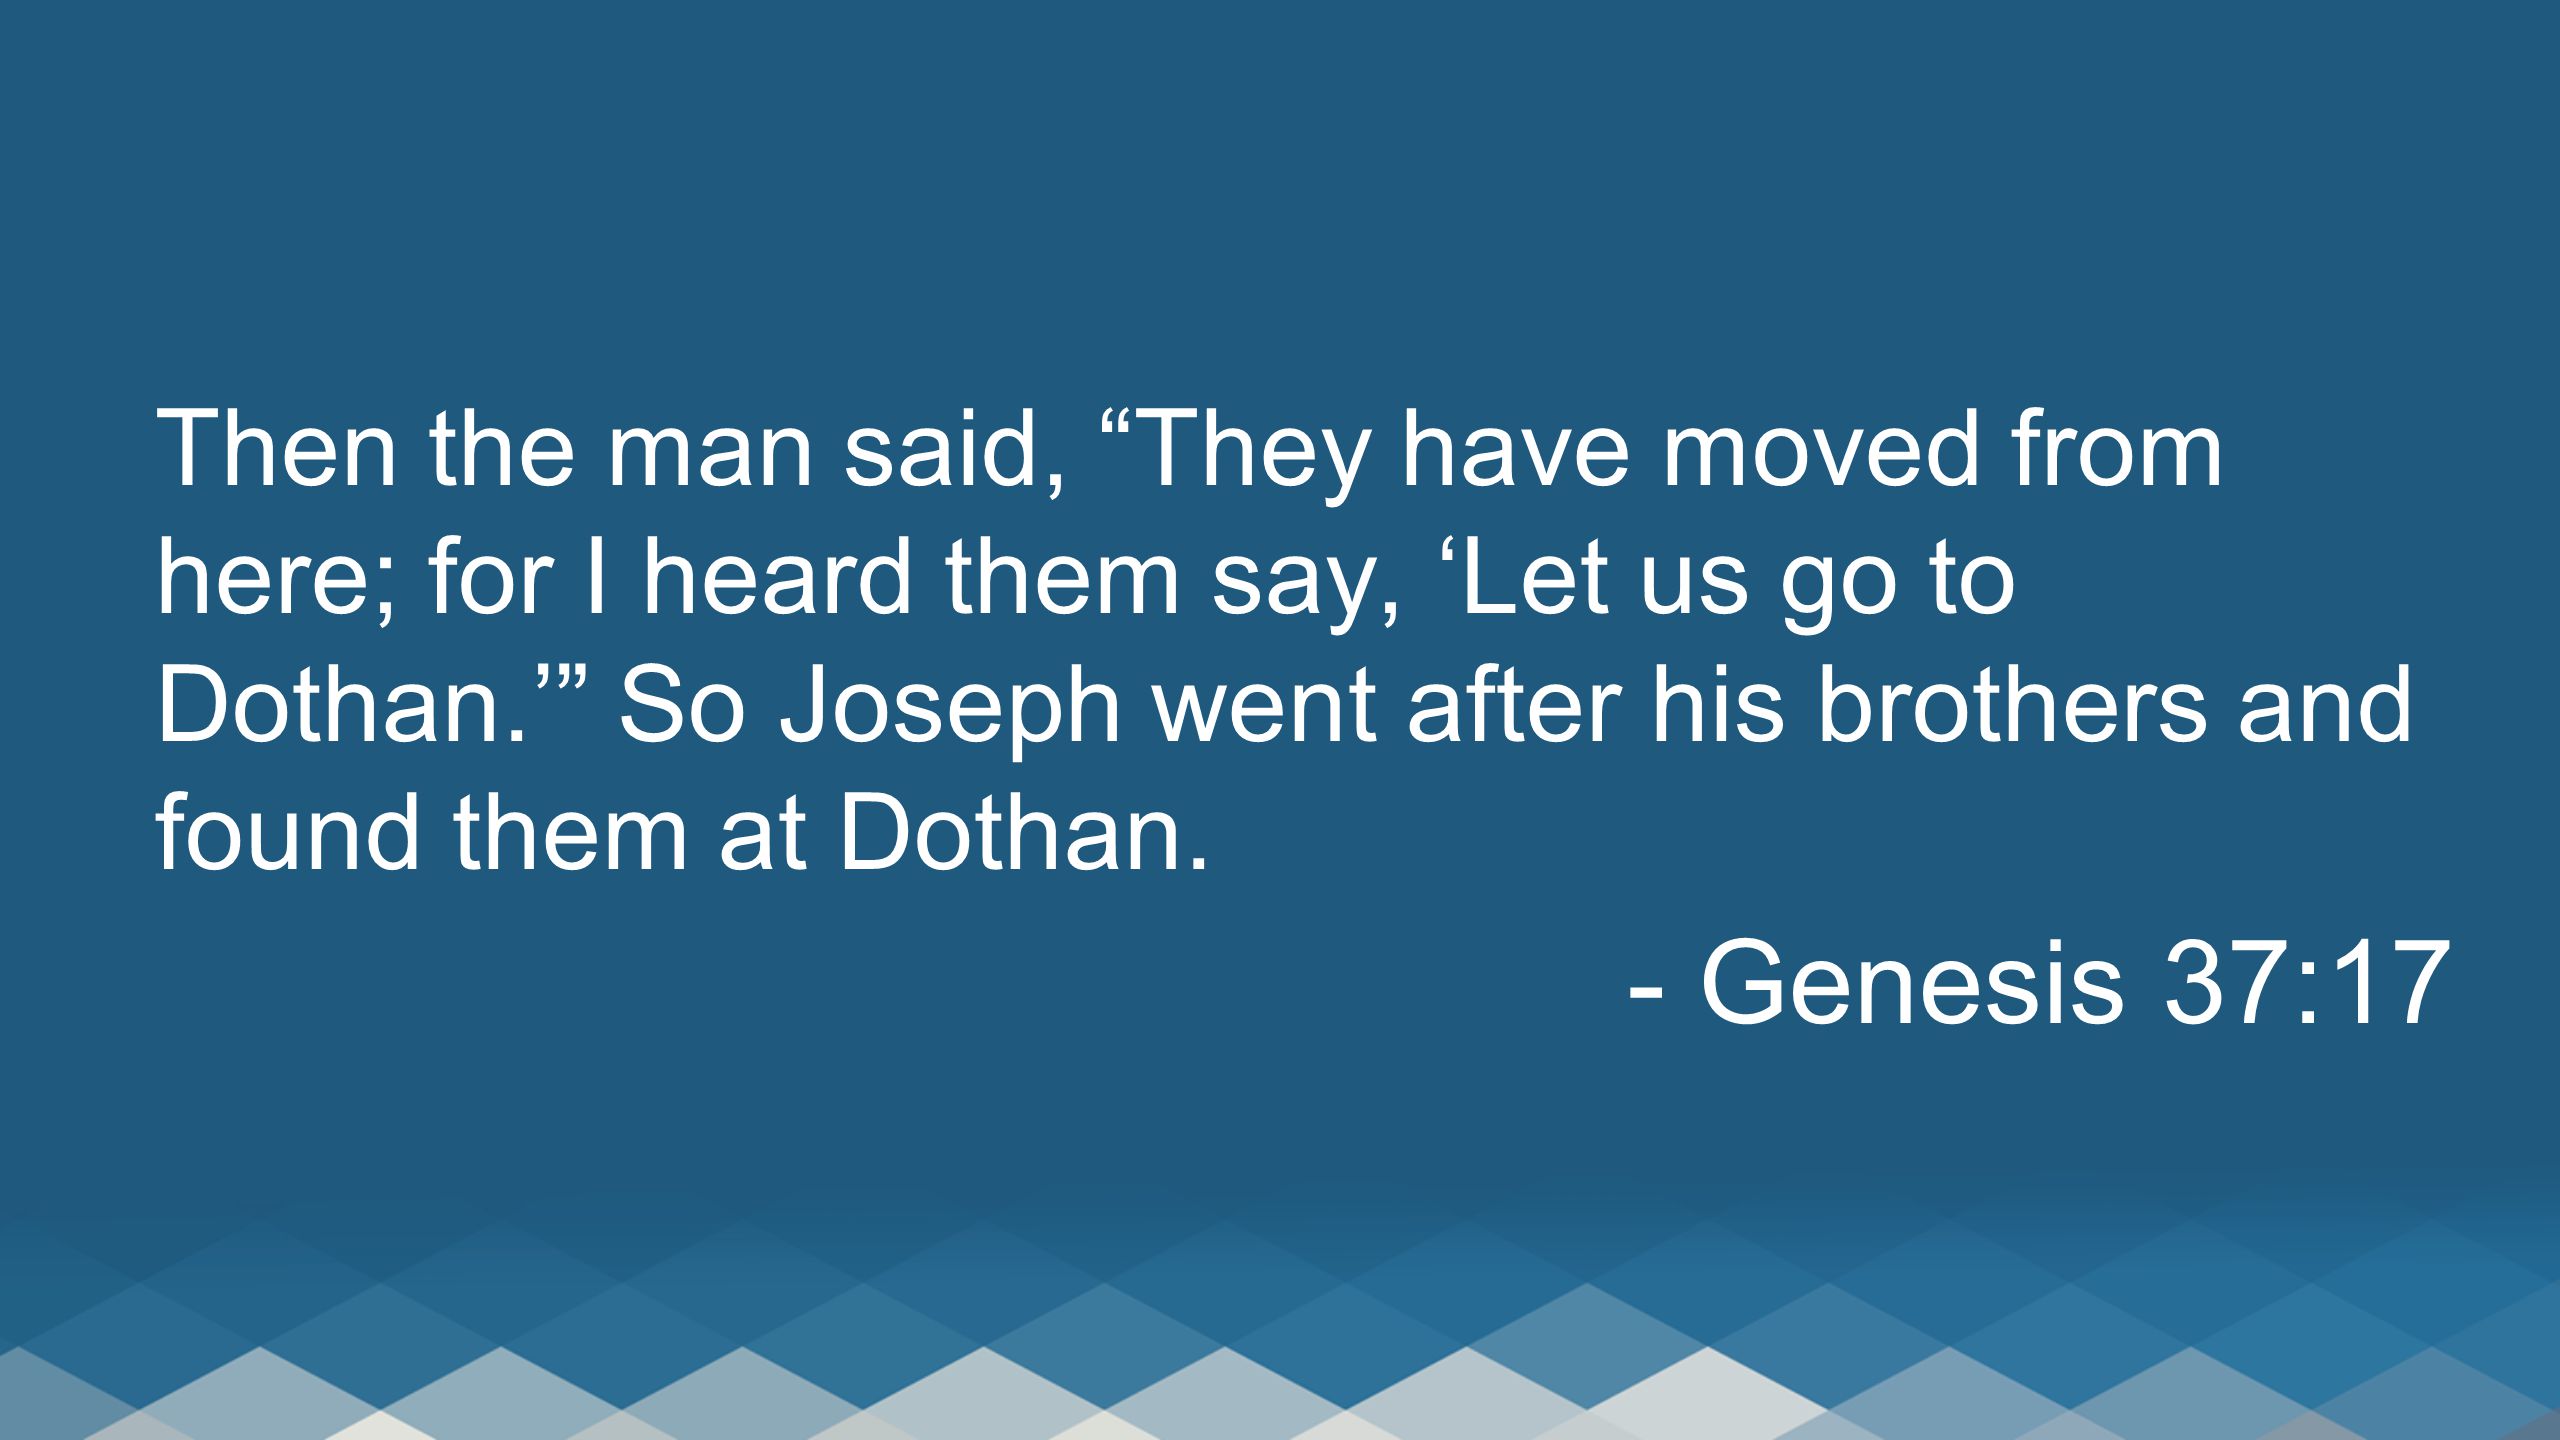 Then the man said, They have moved from here; for I heard them say, ‘Let us go to Dothan.’ So Joseph went after his brothers and found them at Dothan.